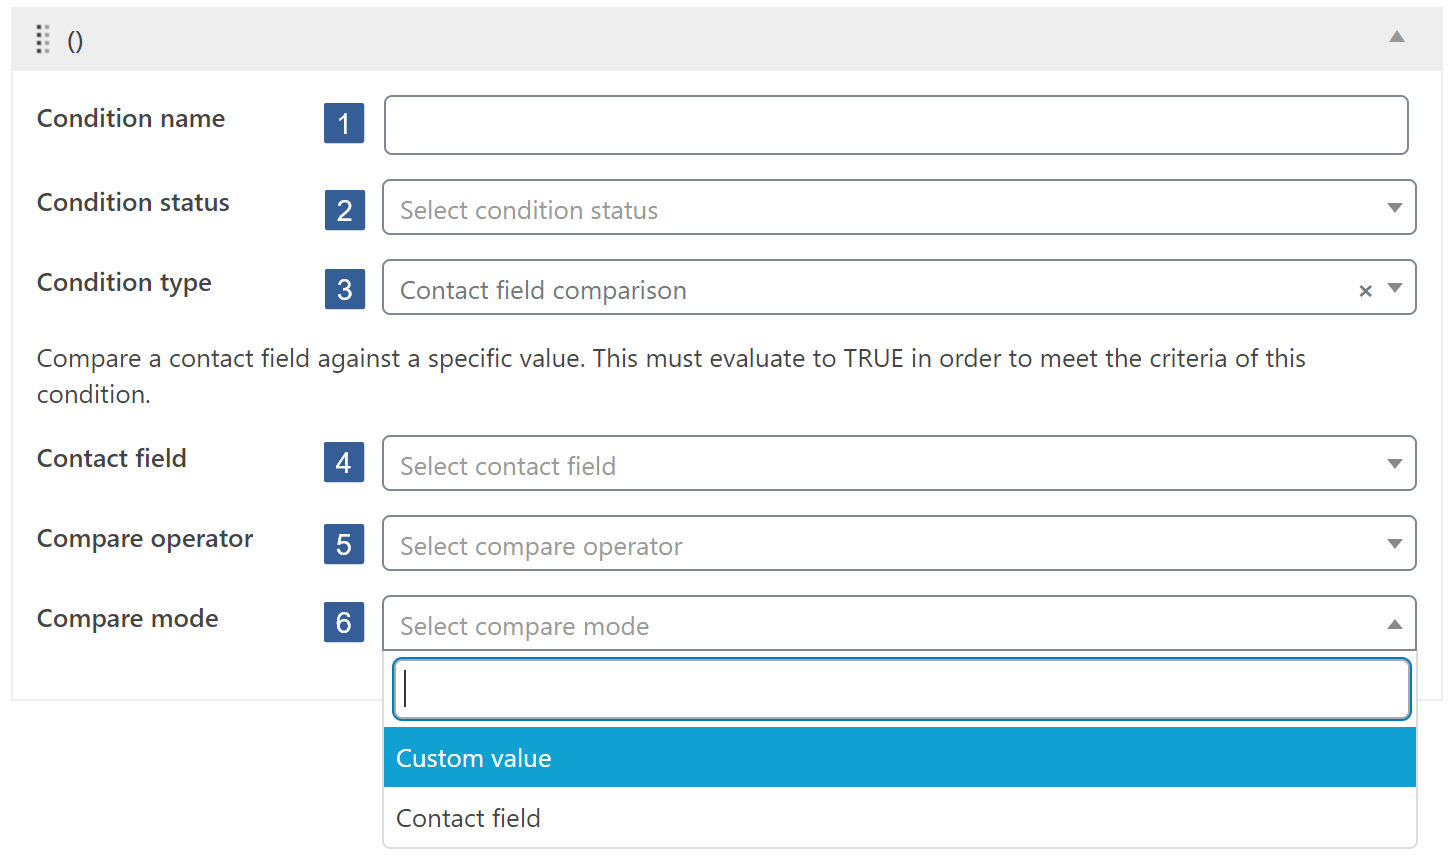 Steps for specifying contact field comparison condition